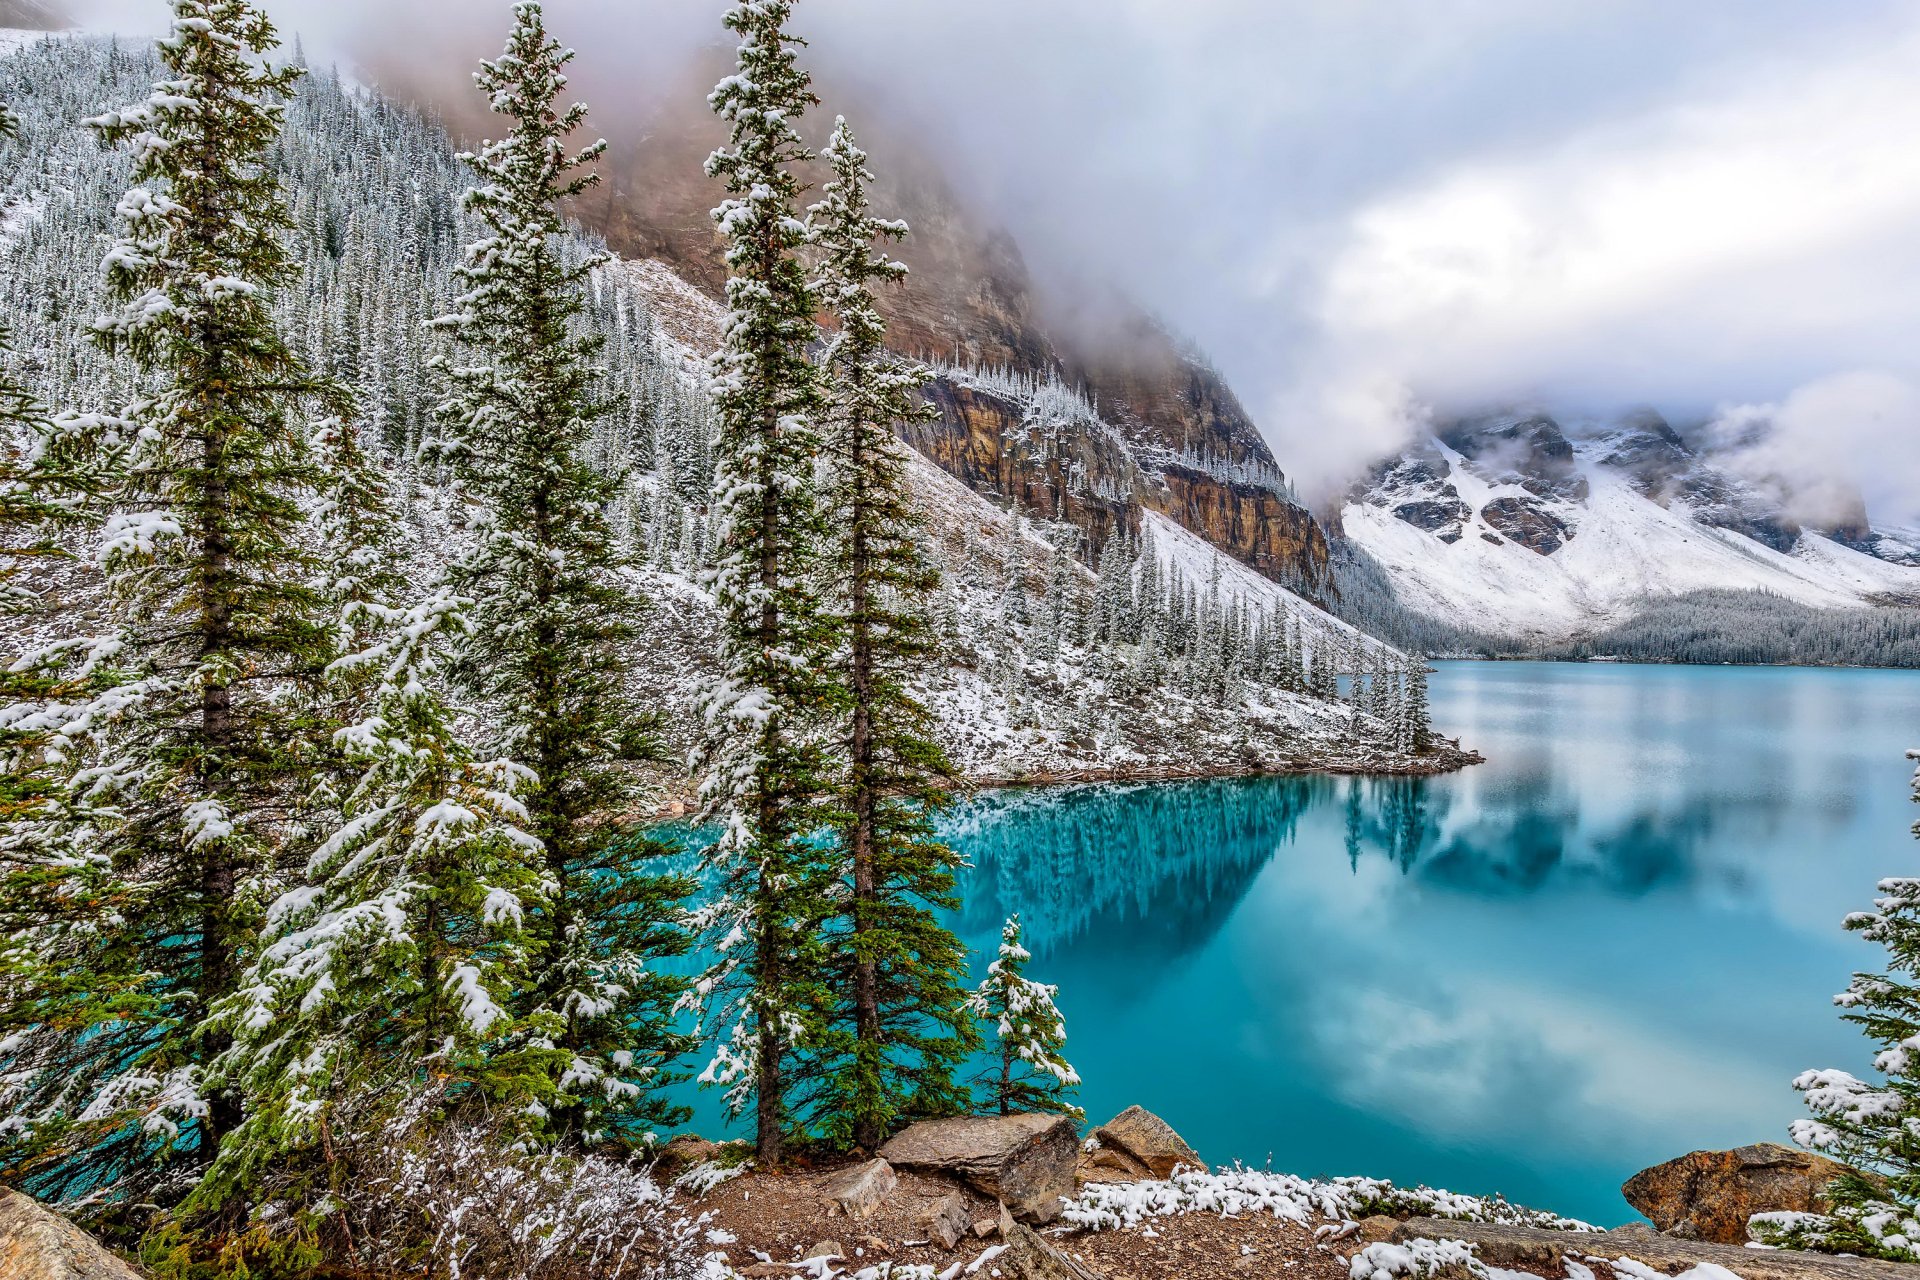 Moraine Lake in Winter HD Wallpaper Background Image 3000x2000 ID719572 Wallpaper Abyss